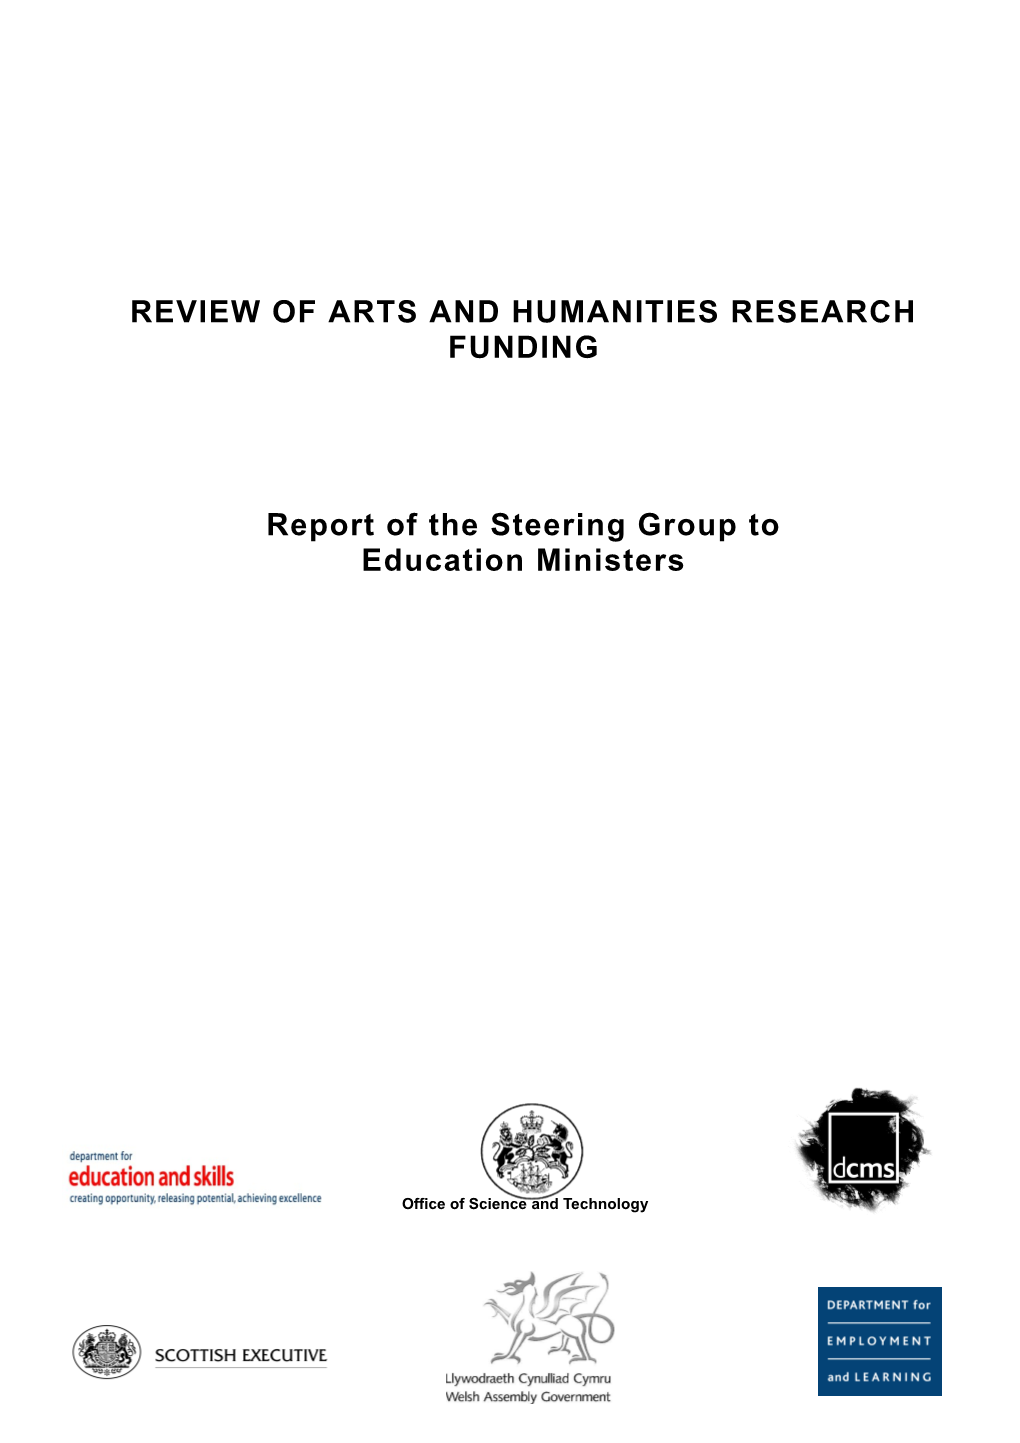 Review of Arts and Humanities Research Funding